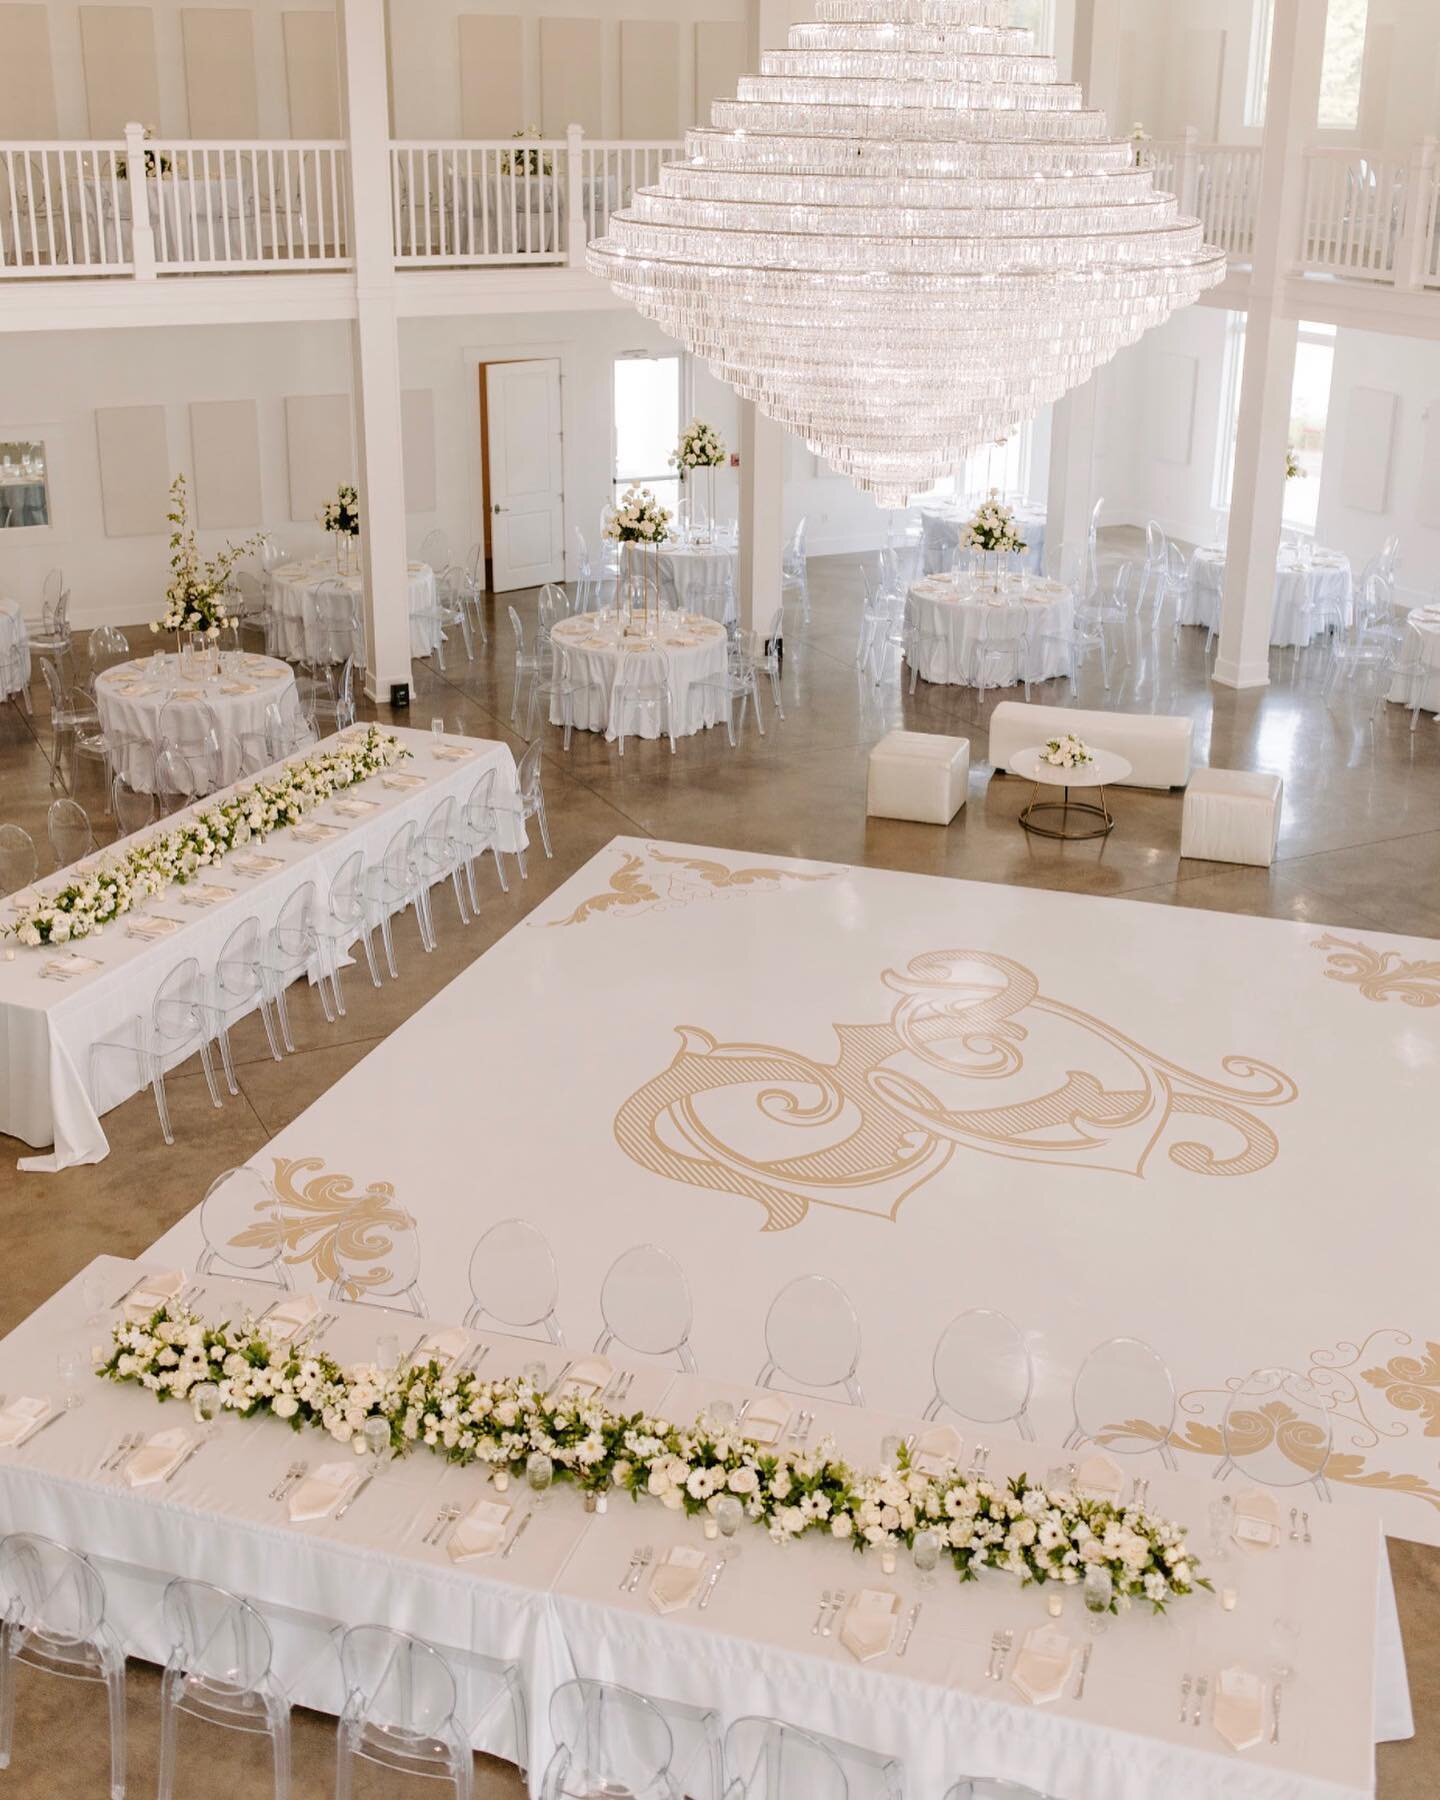 Don&rsquo;t get me wrong, I love when brides want to incorporate color into their wedding day, but I&rsquo;ll always believe in the beauty of an all white/neutral wedding 🤍🤩
//
@raeganbuckleyphoto 
@thedancefloorman 
@legacyacresar 
@eventology_us 